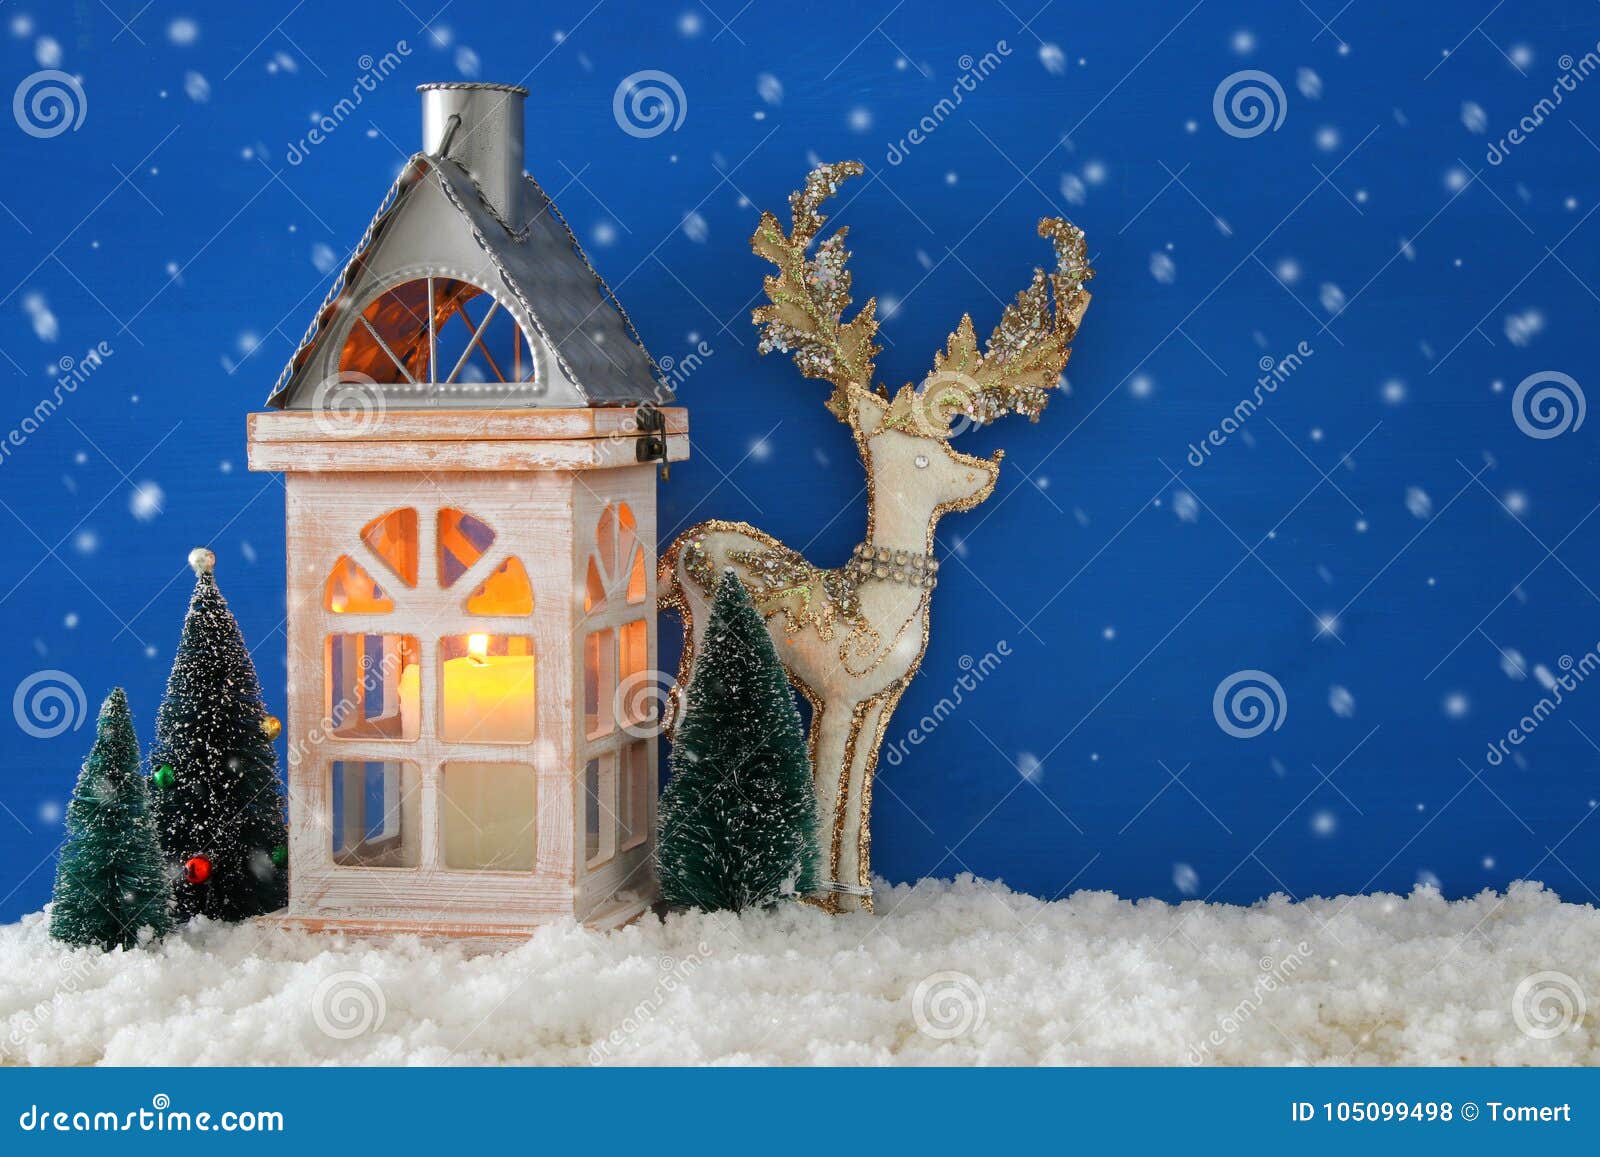 Wooden Old House with Candle, White Deer Next To Christmas Trees Over ...